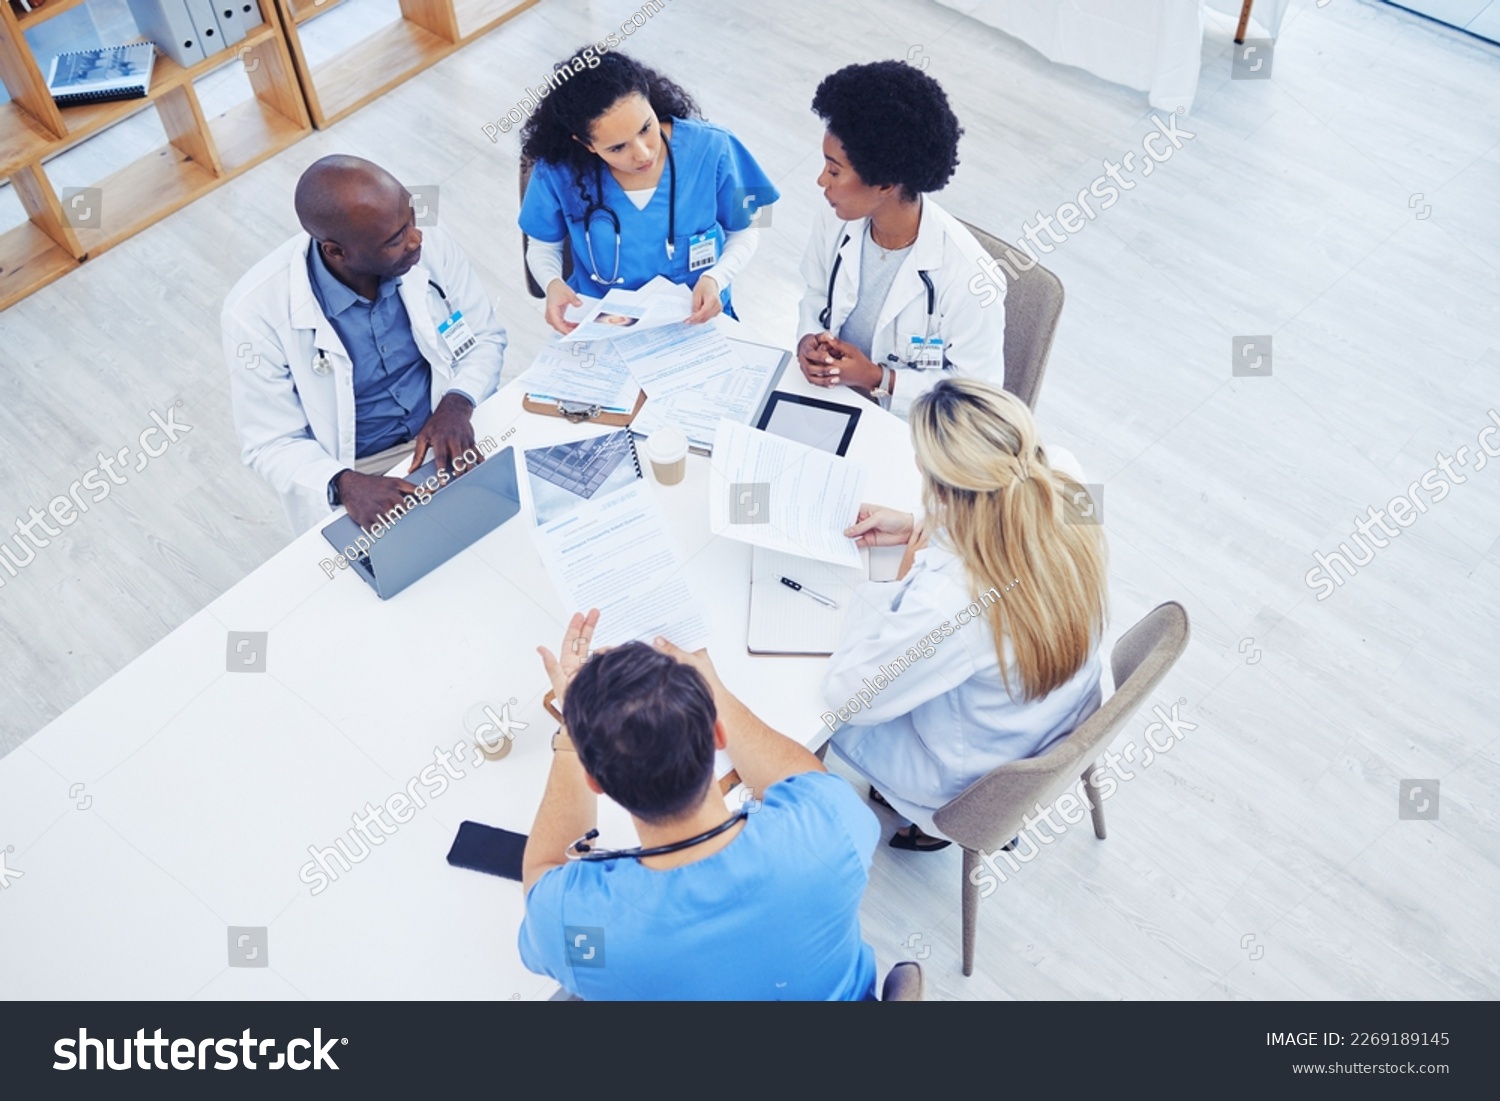 Above, healthcare and meeting by doctors on laptop for research, planning and innovation at hospital. Doctor, team and health experts brainstorm, problem solving or discussing online project together #2269189145